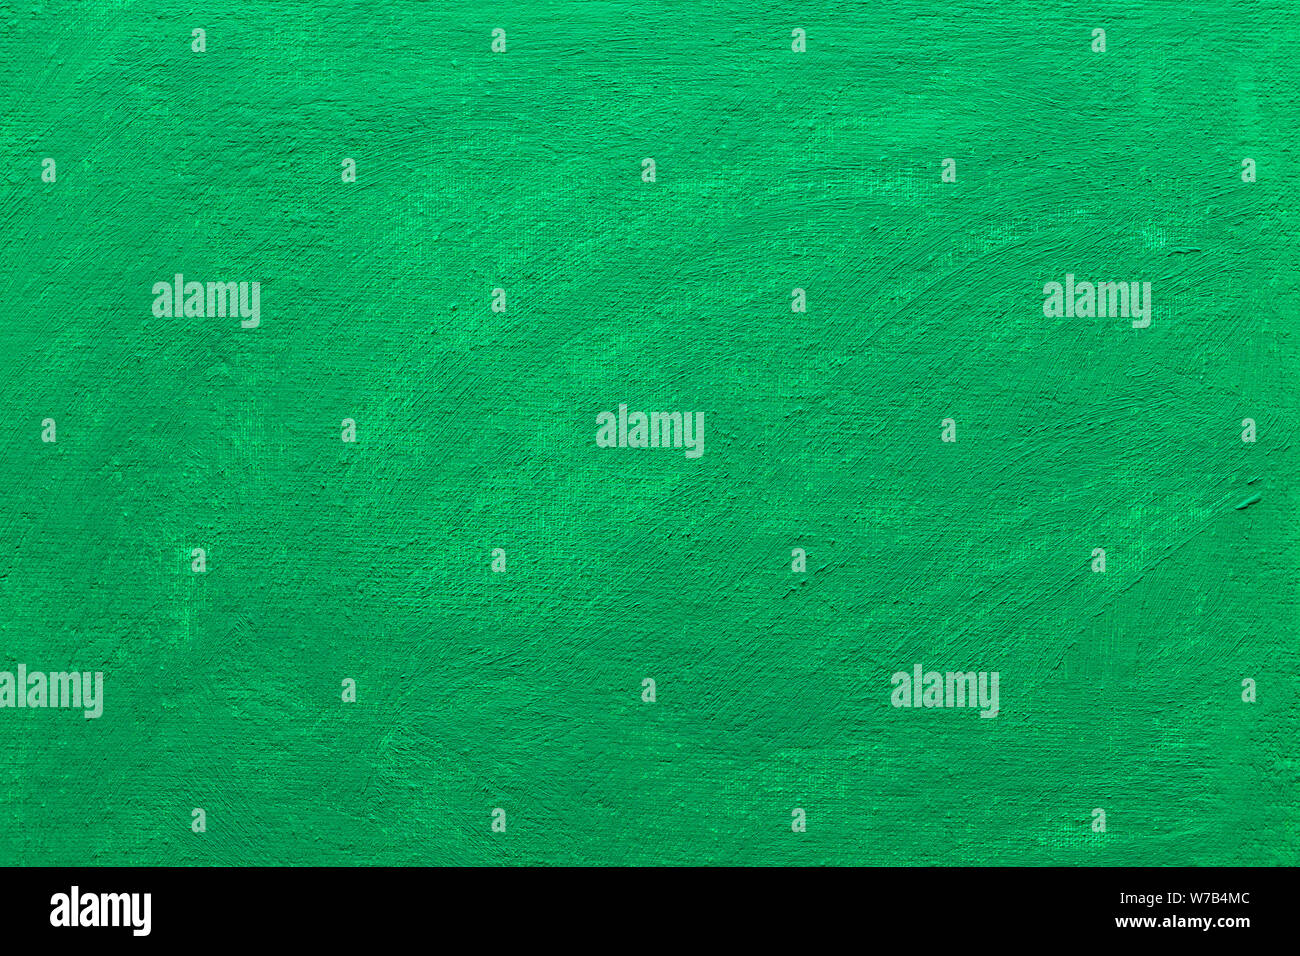 Abstract grunge painted background. Background was painted with green egg tempera on canvas by hand. Stock Photo